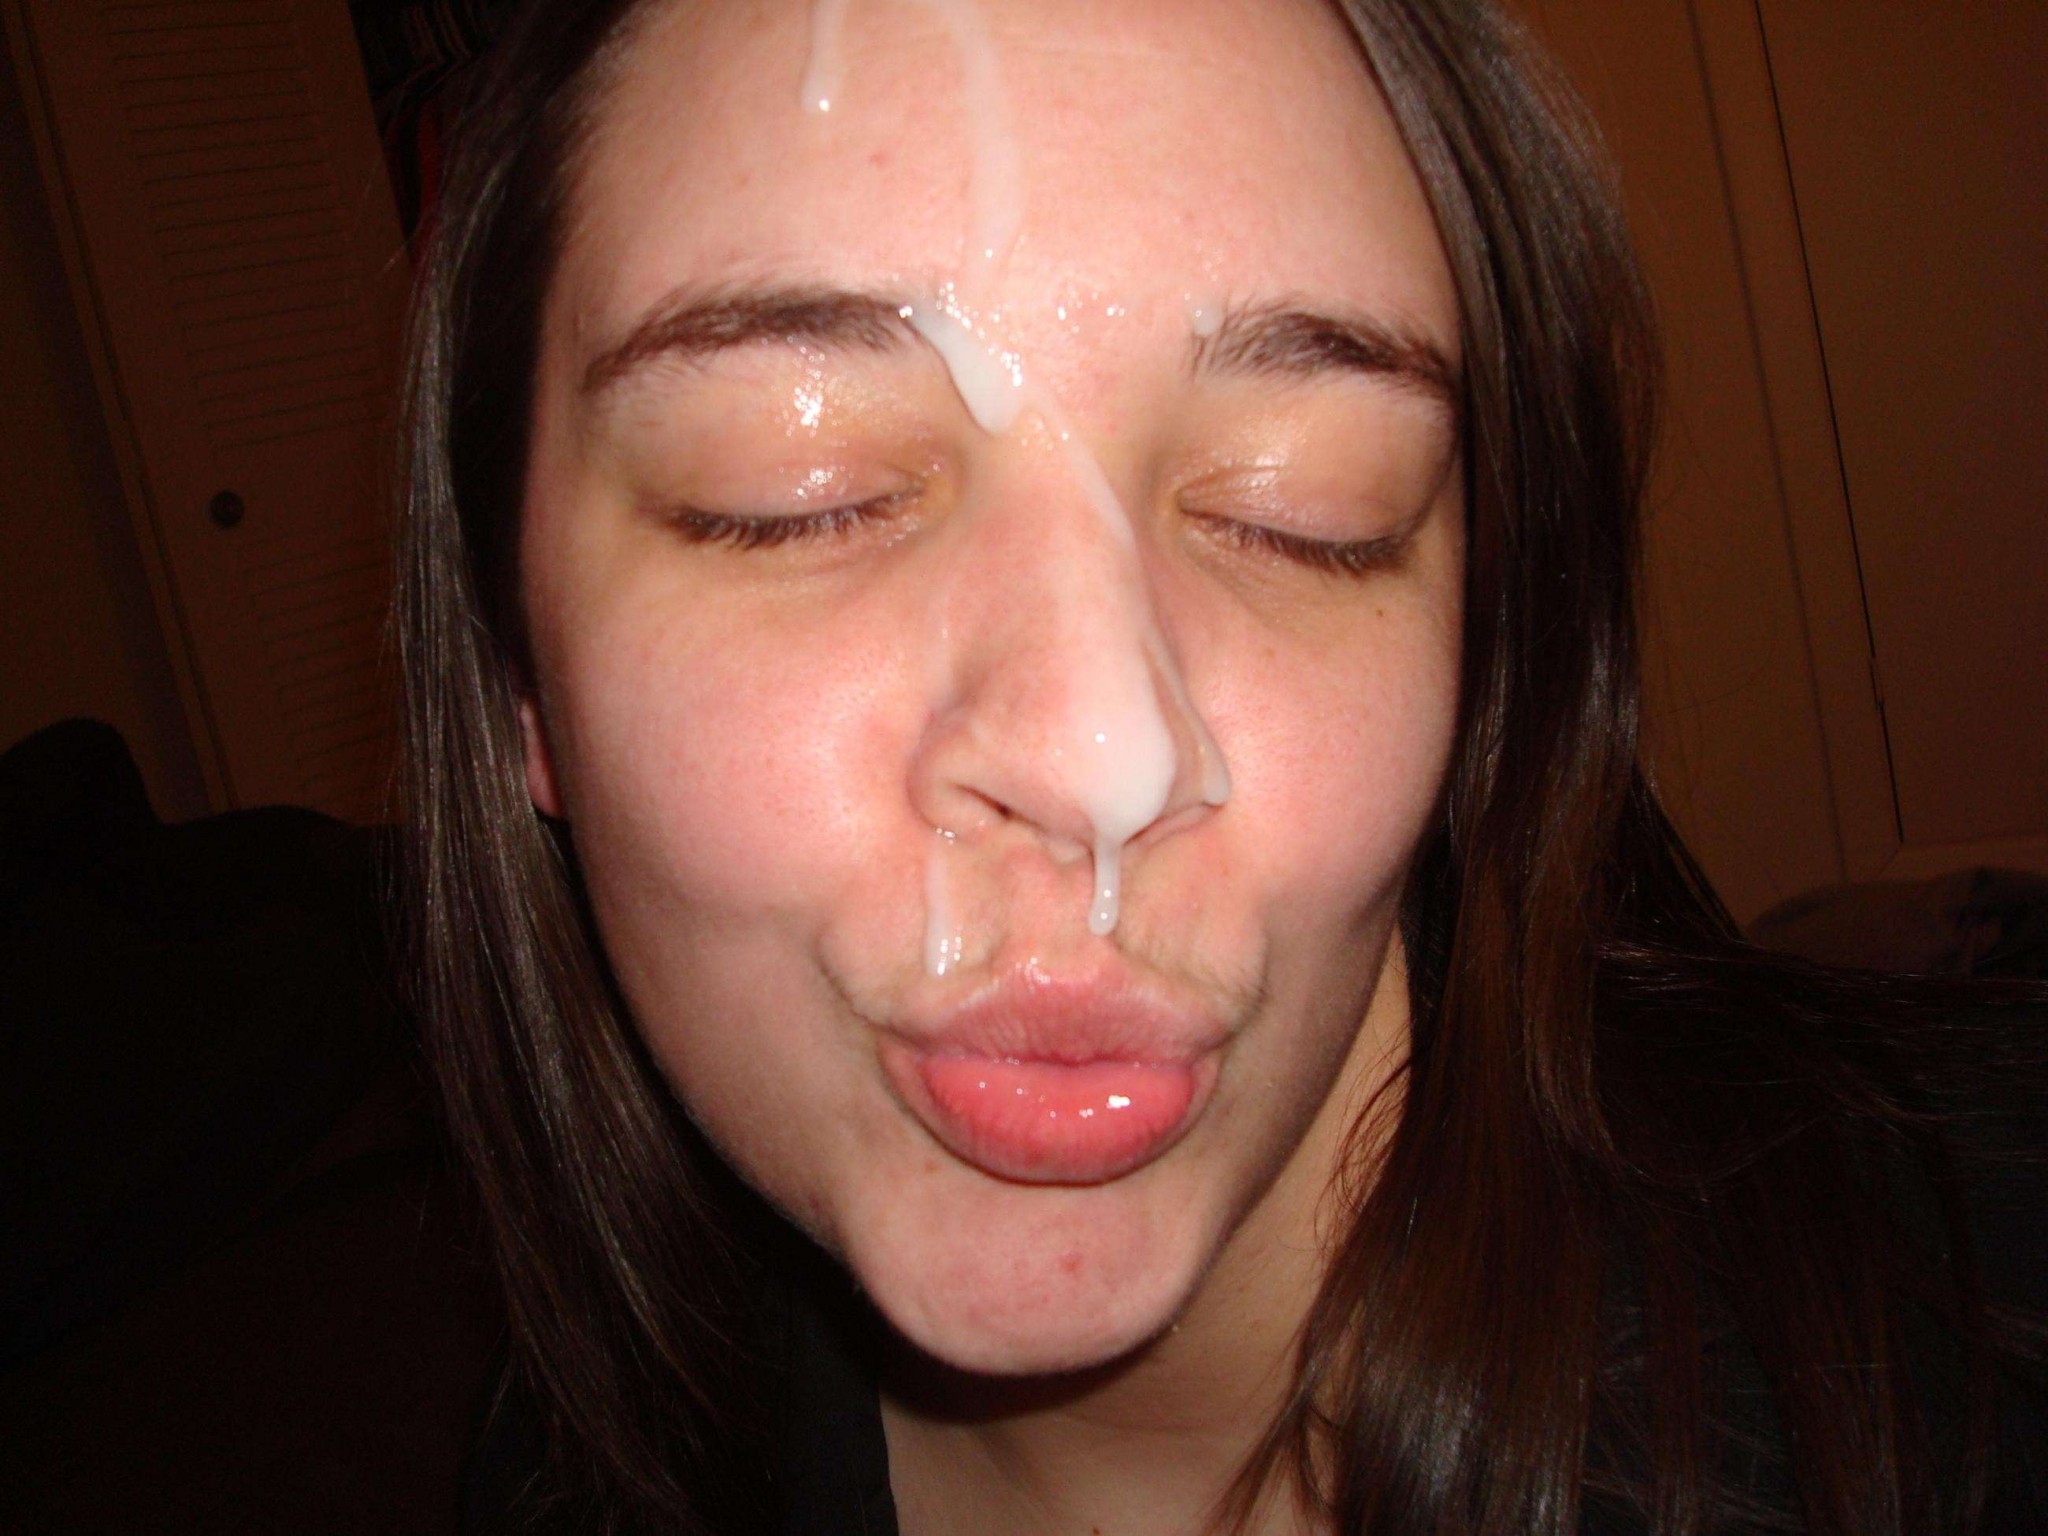 Photos of an amateur chick's hot and sticky cum facial #75723175